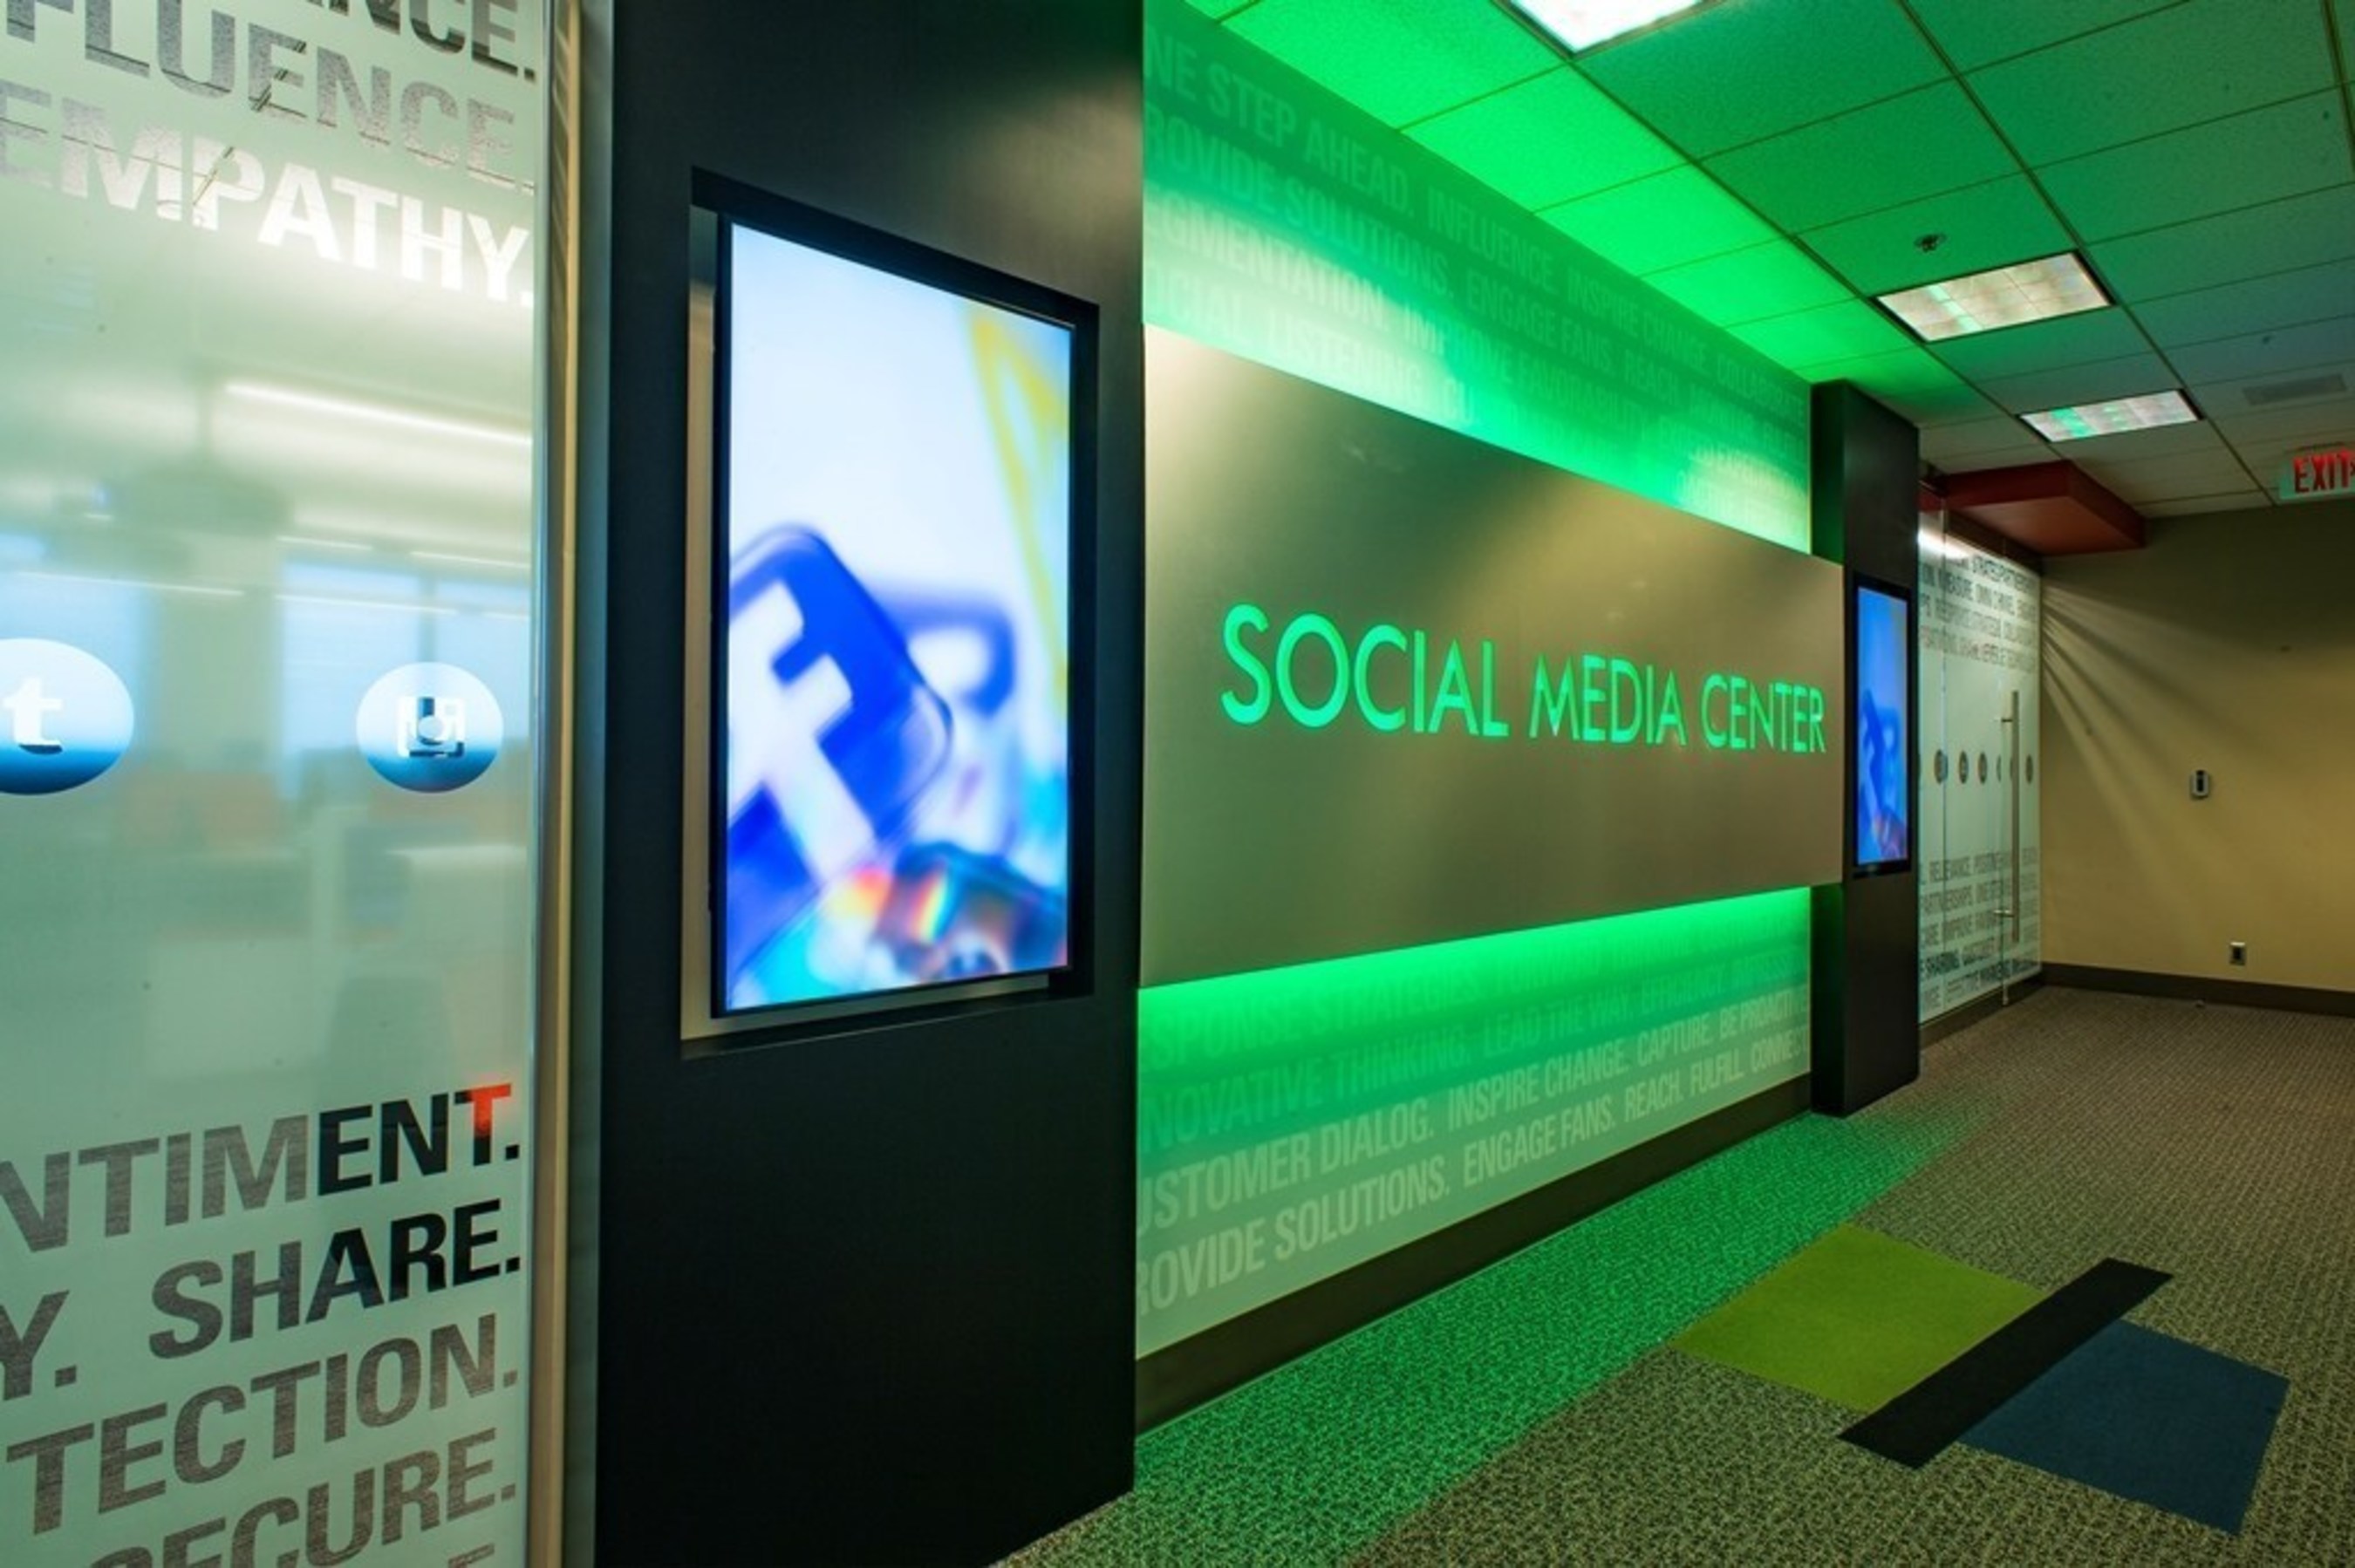 The exterior of Georgia Power's new Social Media Center in Atlanta. The new center is located near the Georgia Power Storm Center, facilitating fast and accurate social media communication with customers during severe weather.